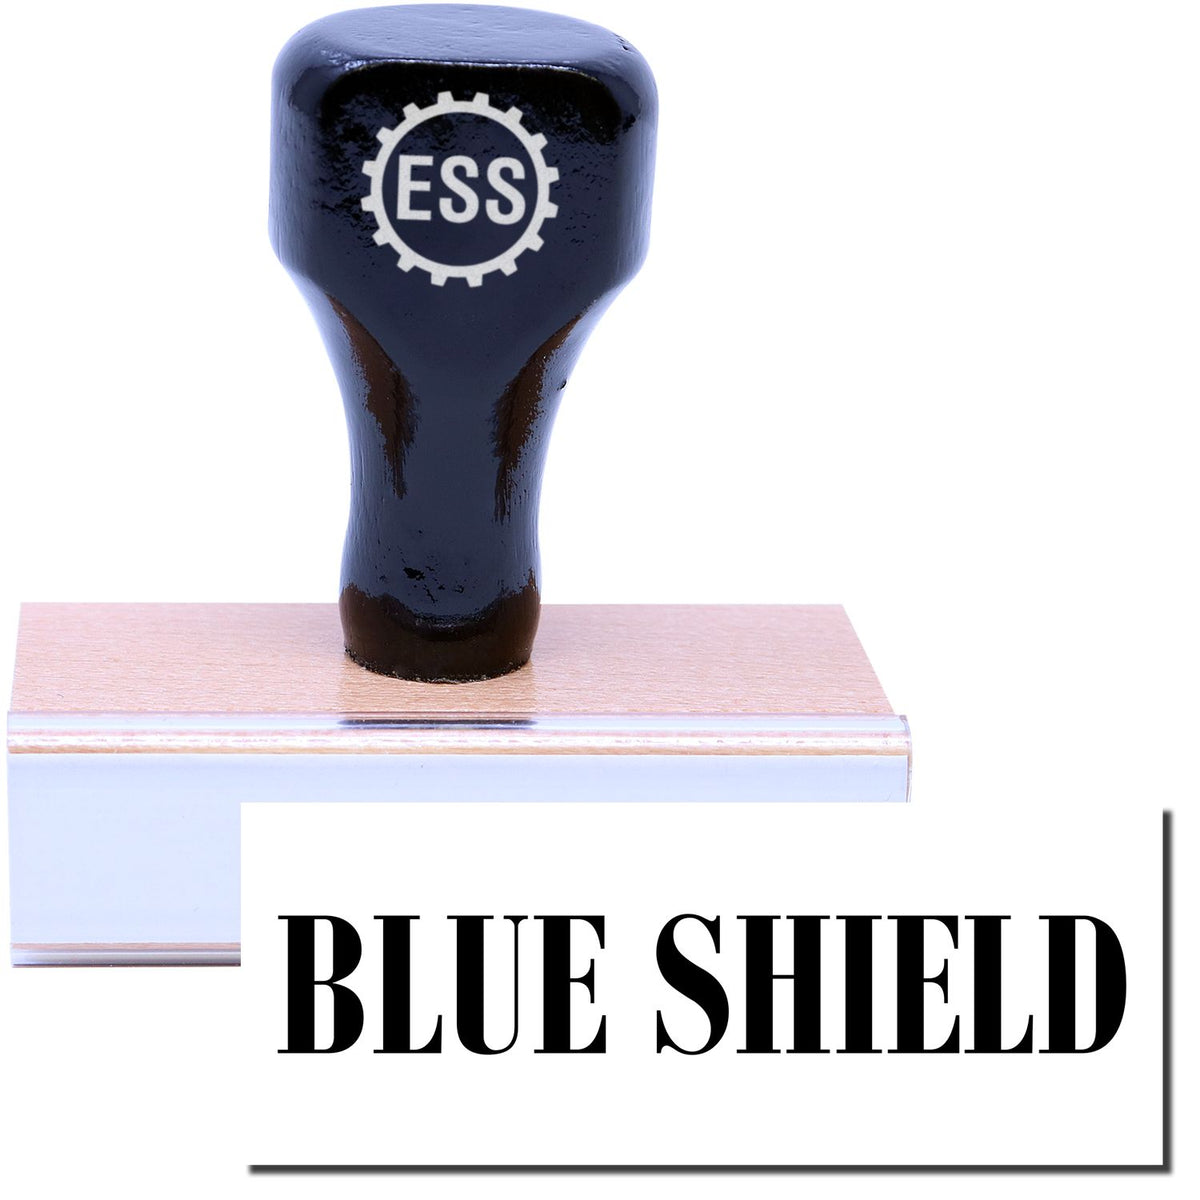 A stock office rubber stamp with a stamped image showing how the text &quot;BLUE SHIELD&quot; in a large font is displayed after stamping.